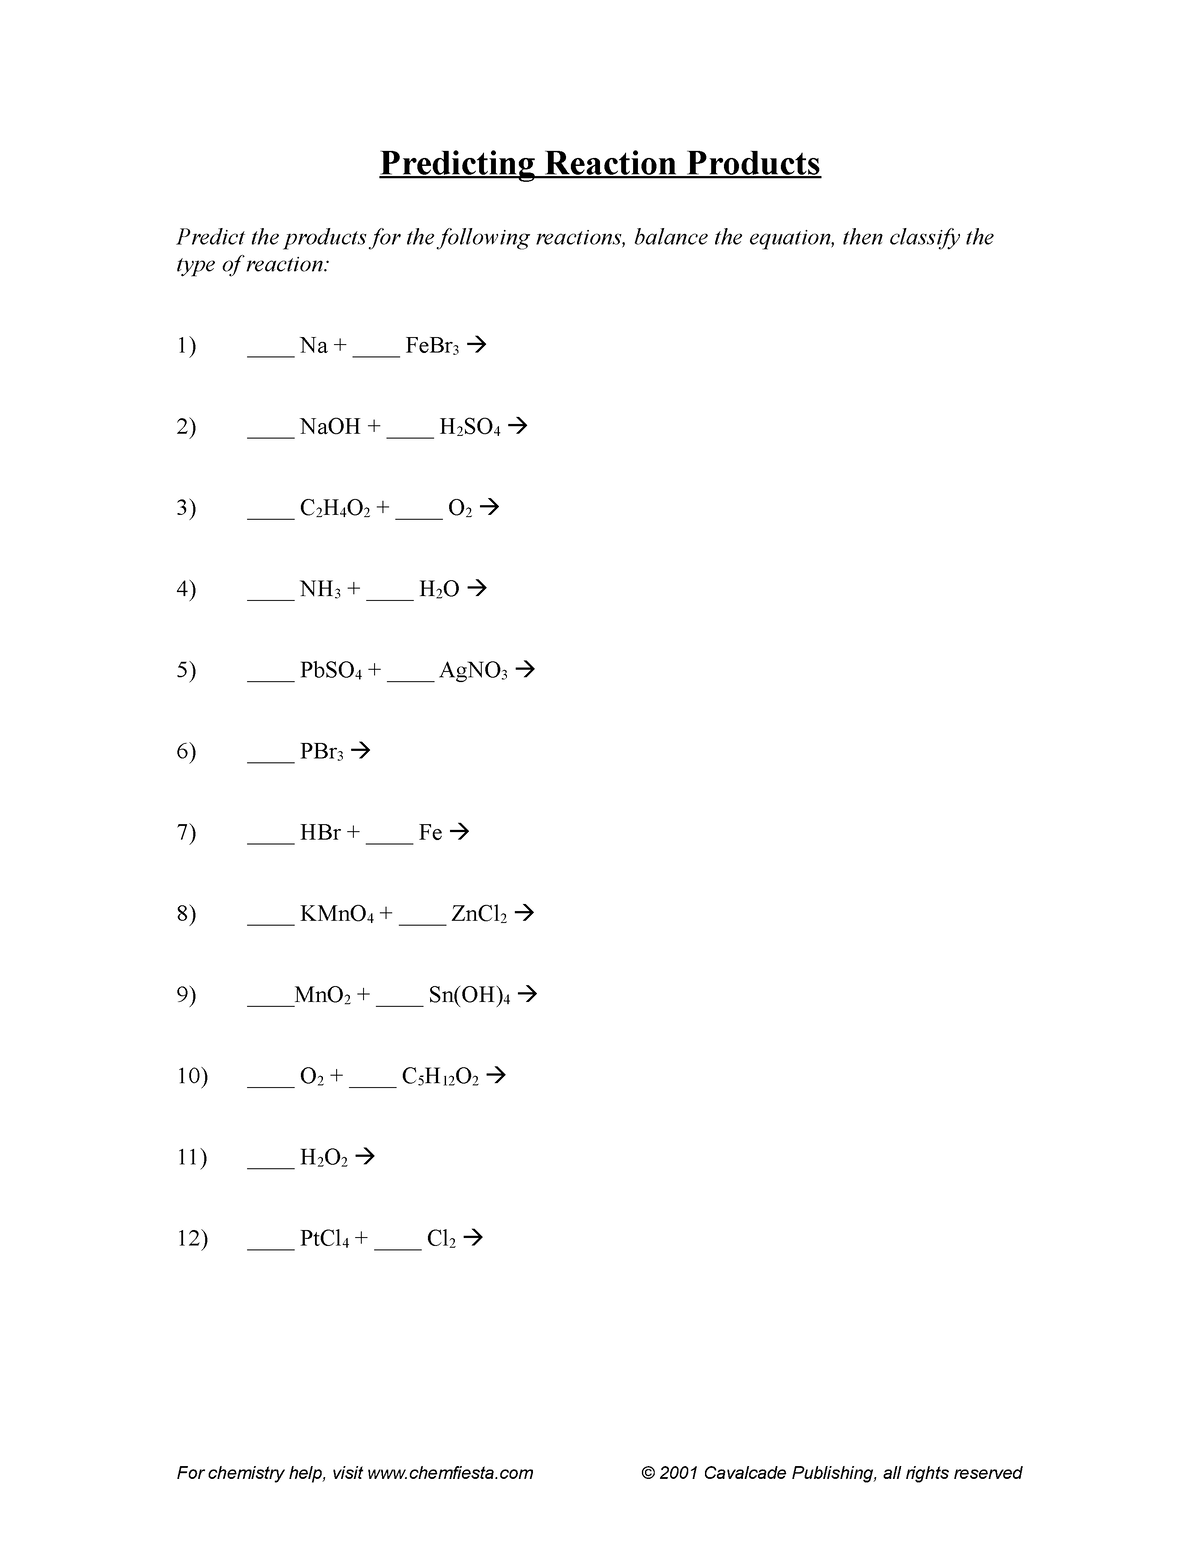 Chm 130 Predicting Products Worksheet Answer Key